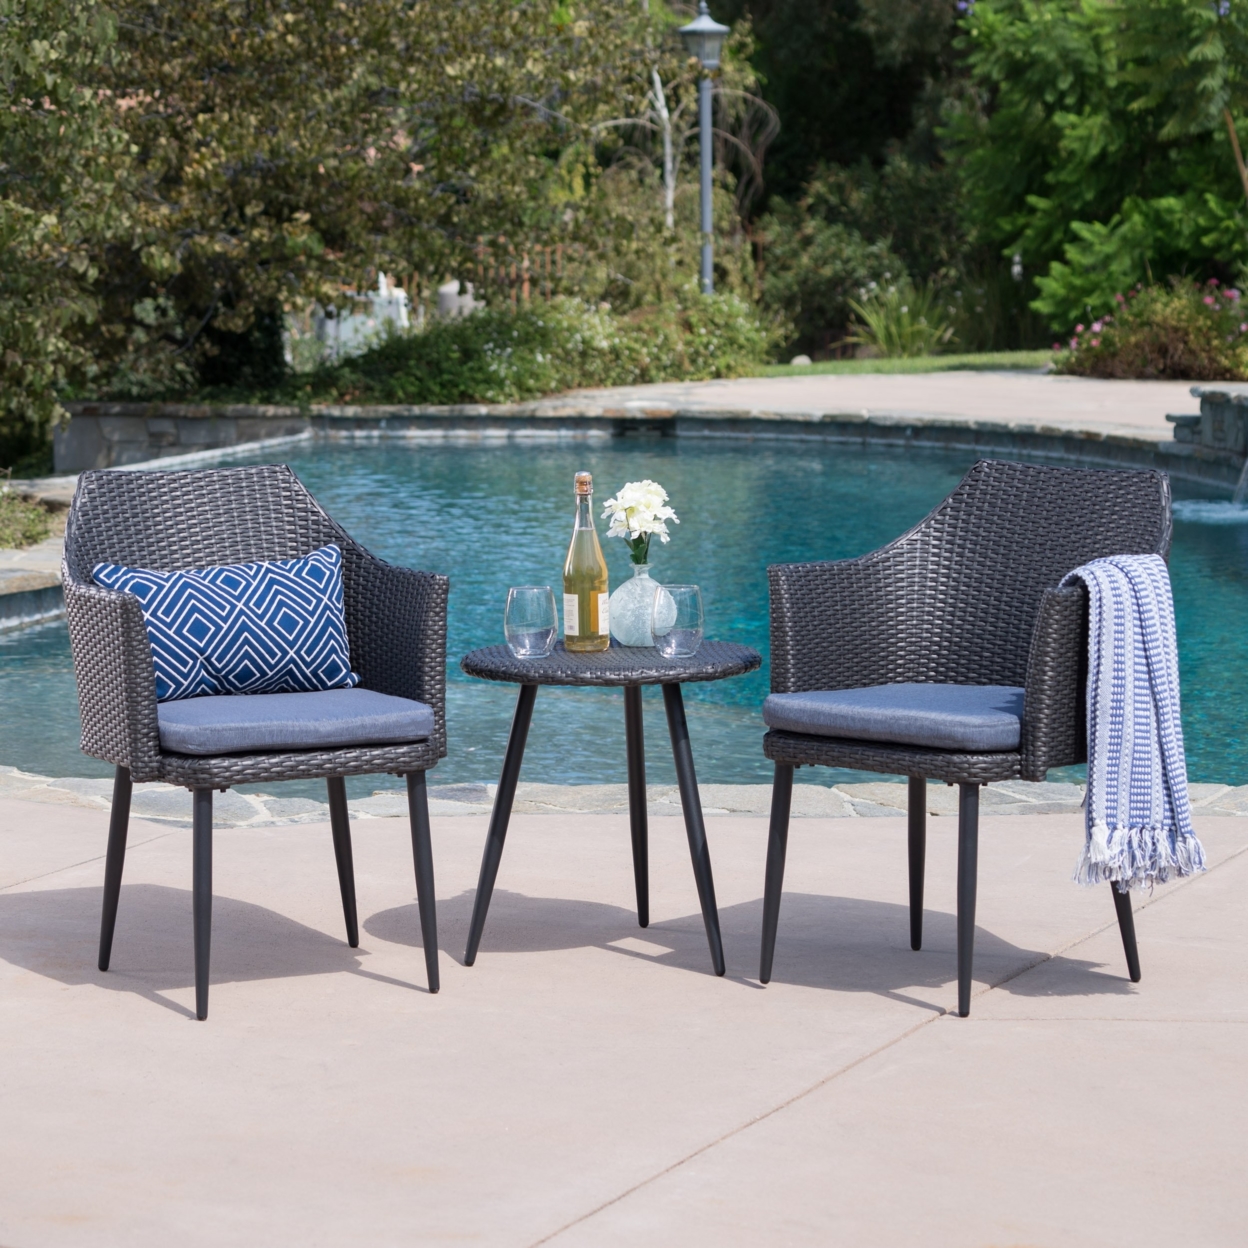 Ibiza Outdoor 3 Piece Wicker Chat Set With Water Resistant Cushions - Gray, Mixed Black Wicker